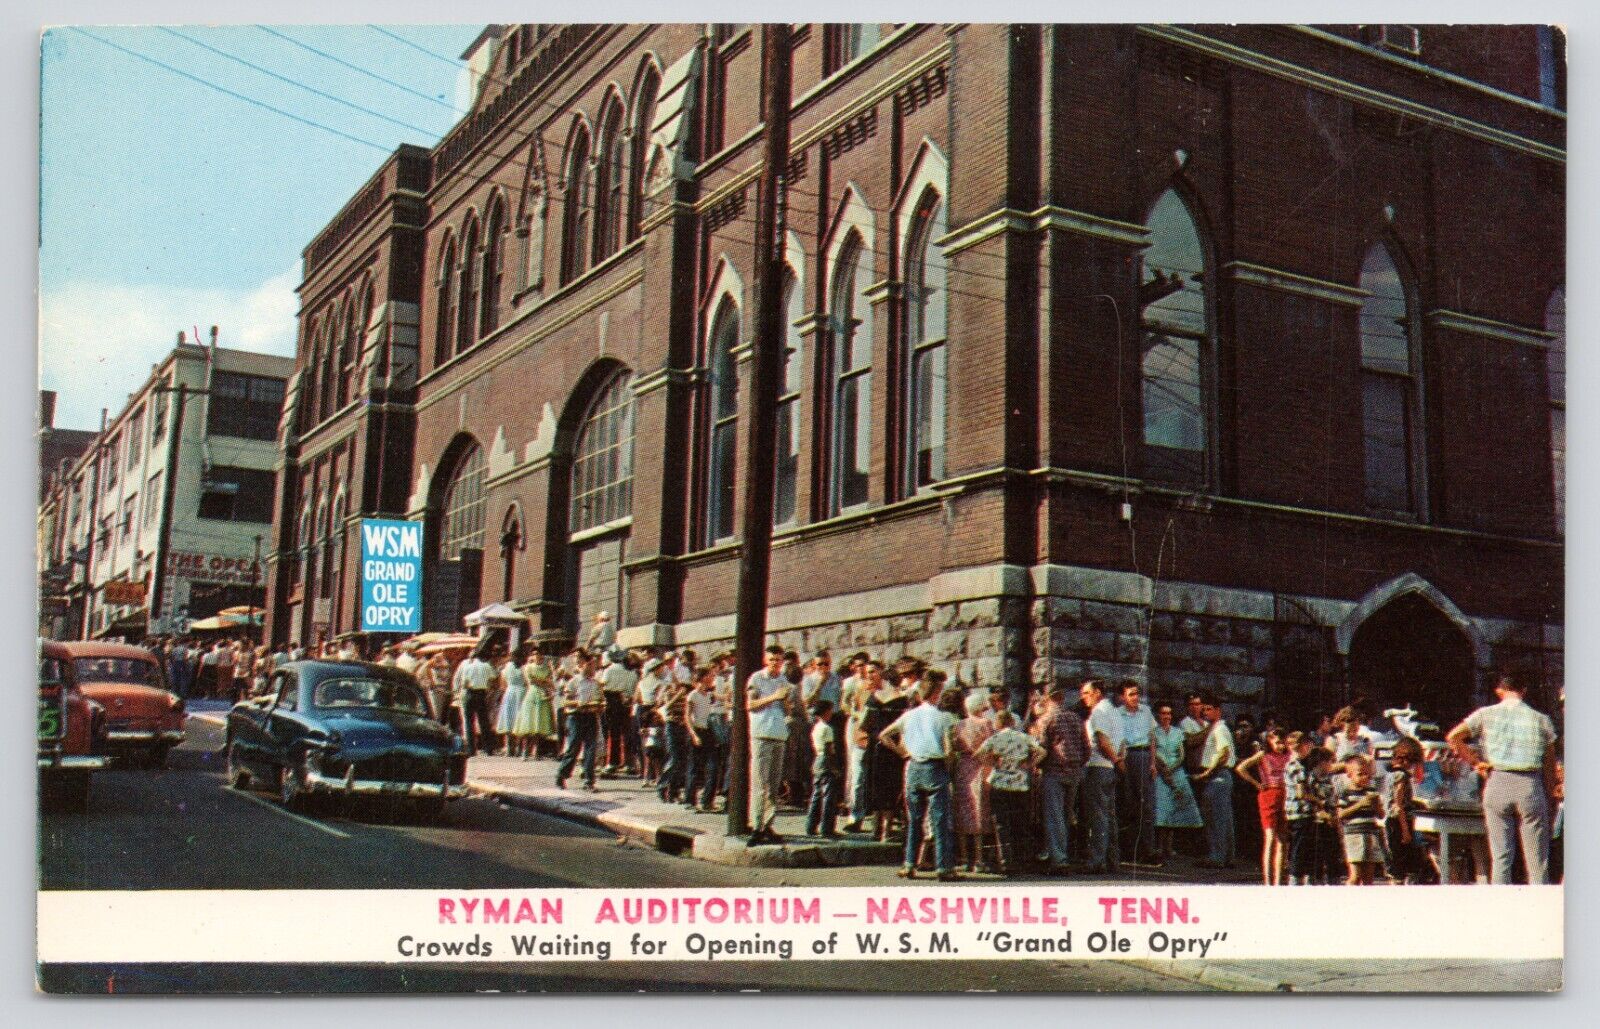 Nashville Tennessee Rhyming Auditorium Opening Of Grand Ole Opry Chrome Postcard